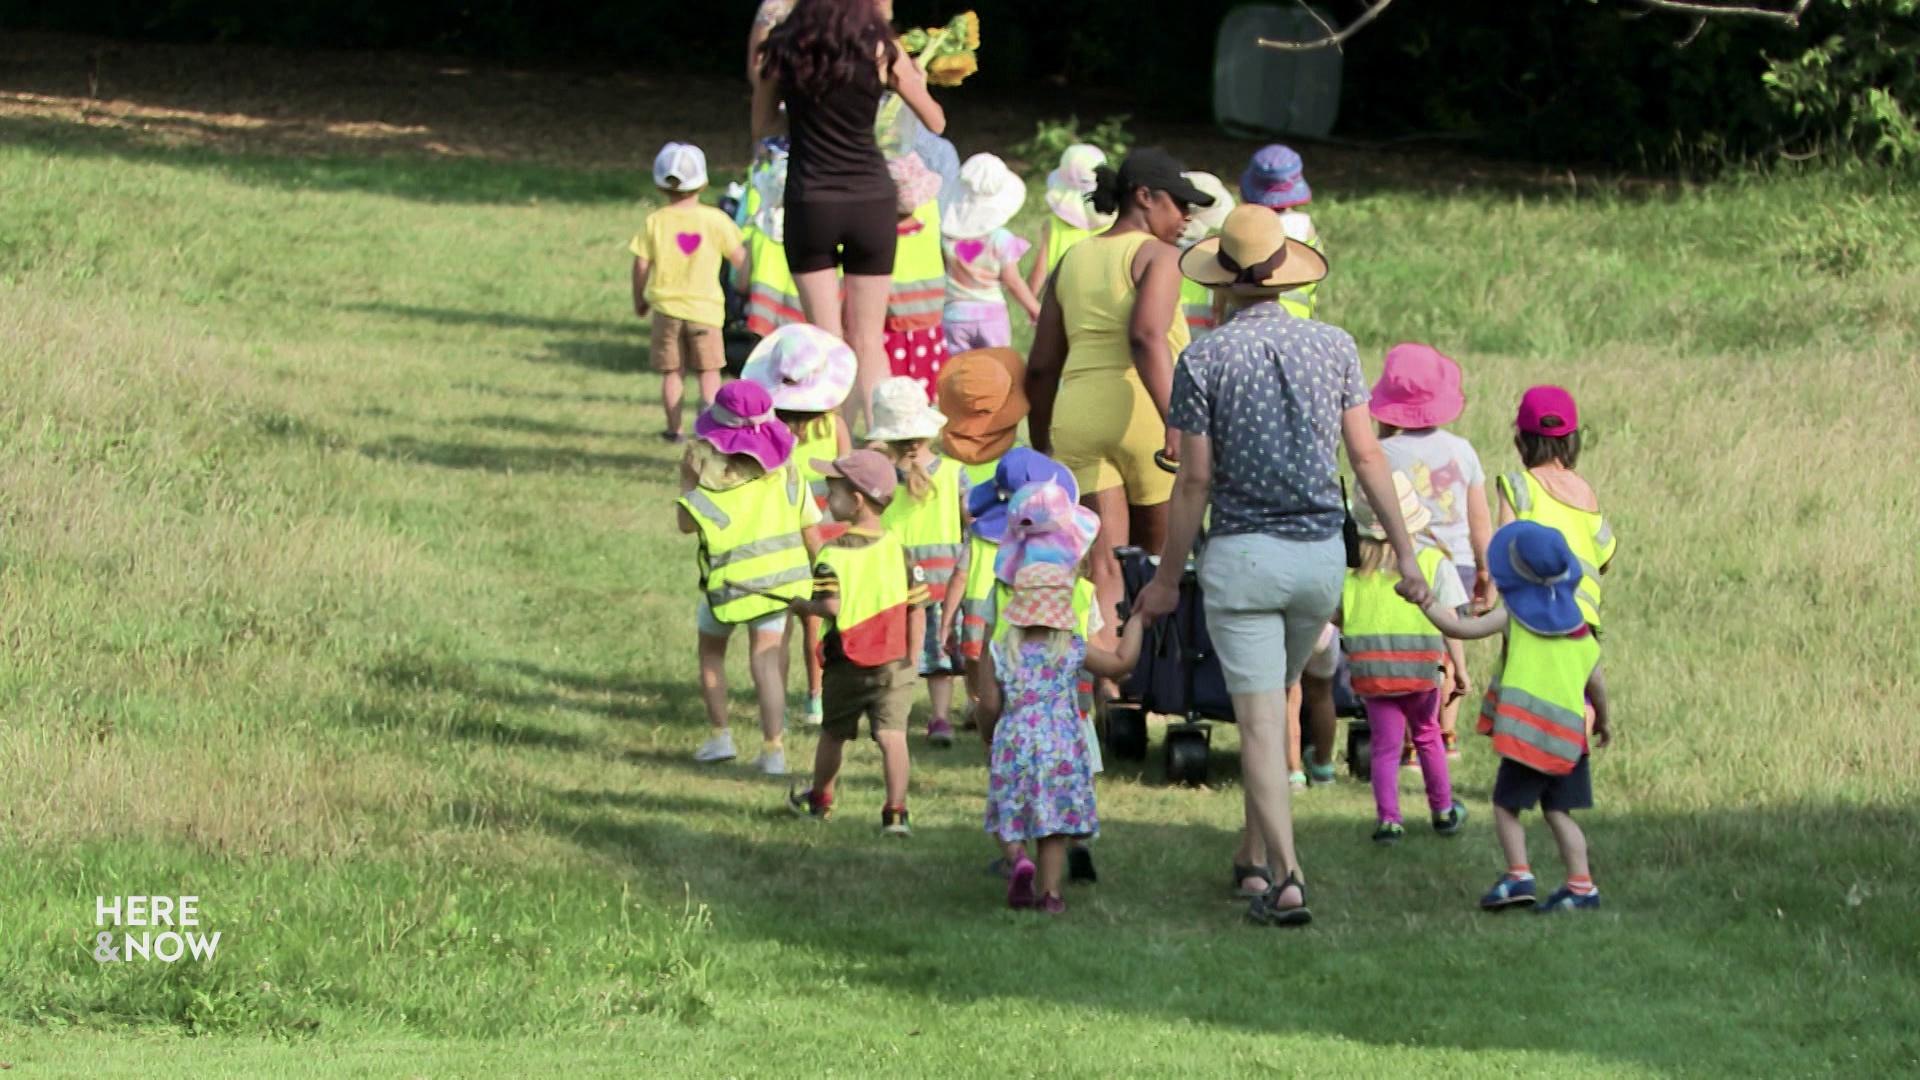 A still image shows a group of children wearing neon safety vests and sun hats while holding hands with adults as they walk through a green field.